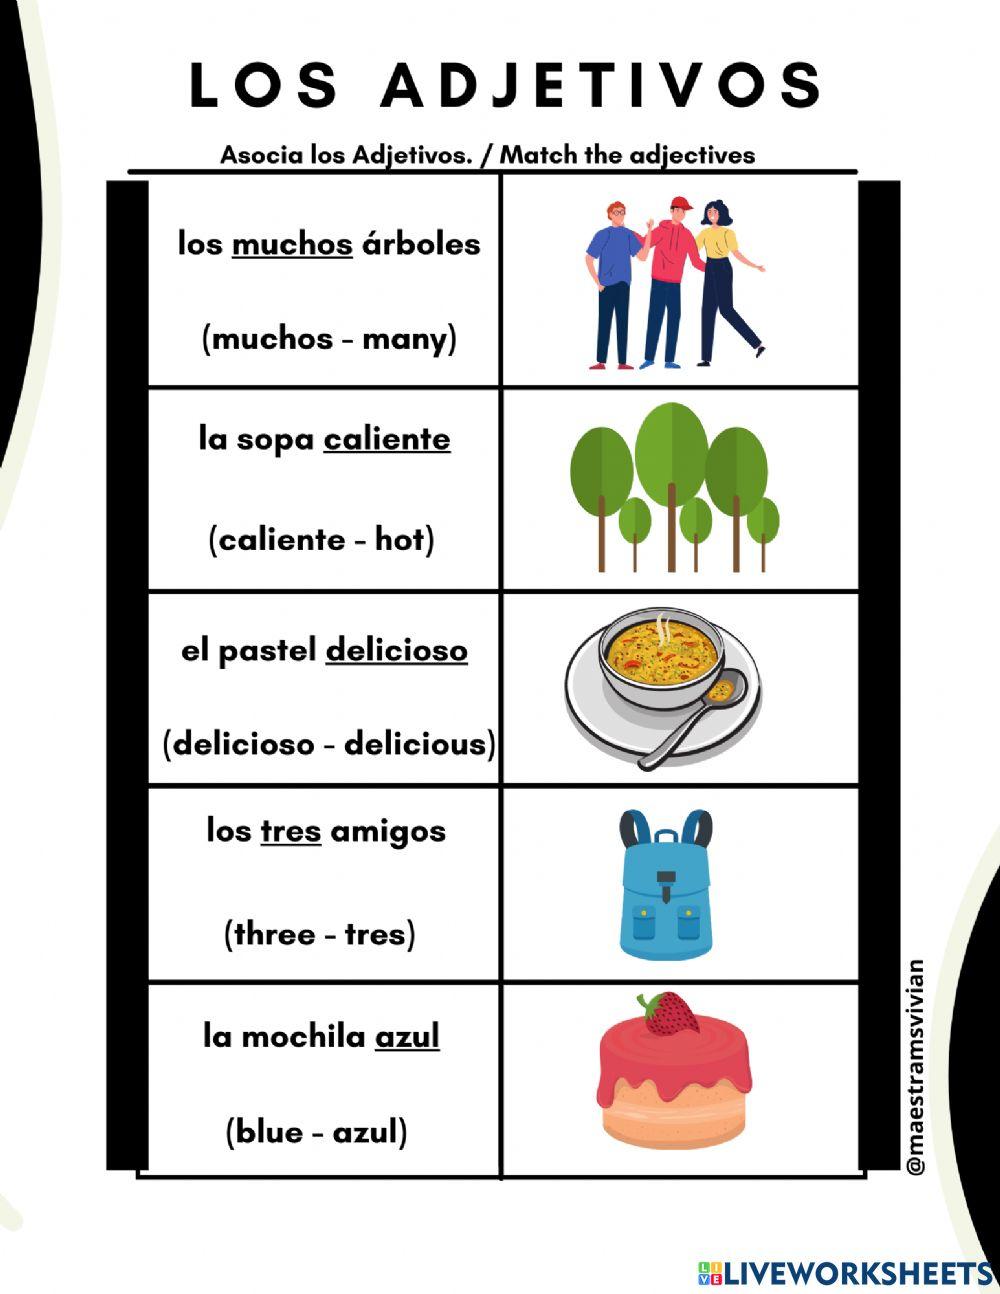 Los Adjetivos exercise for Primary / Intermediate | Live Worksheets